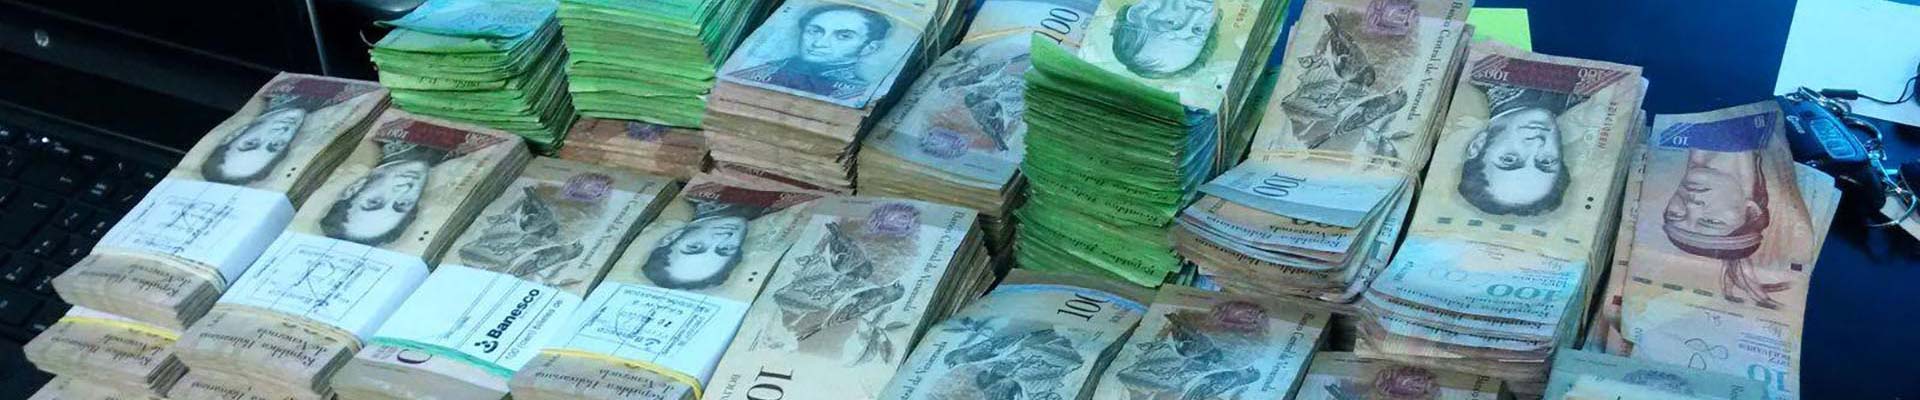 Inflation of the Bolivar: Venezuela 2016 Issues